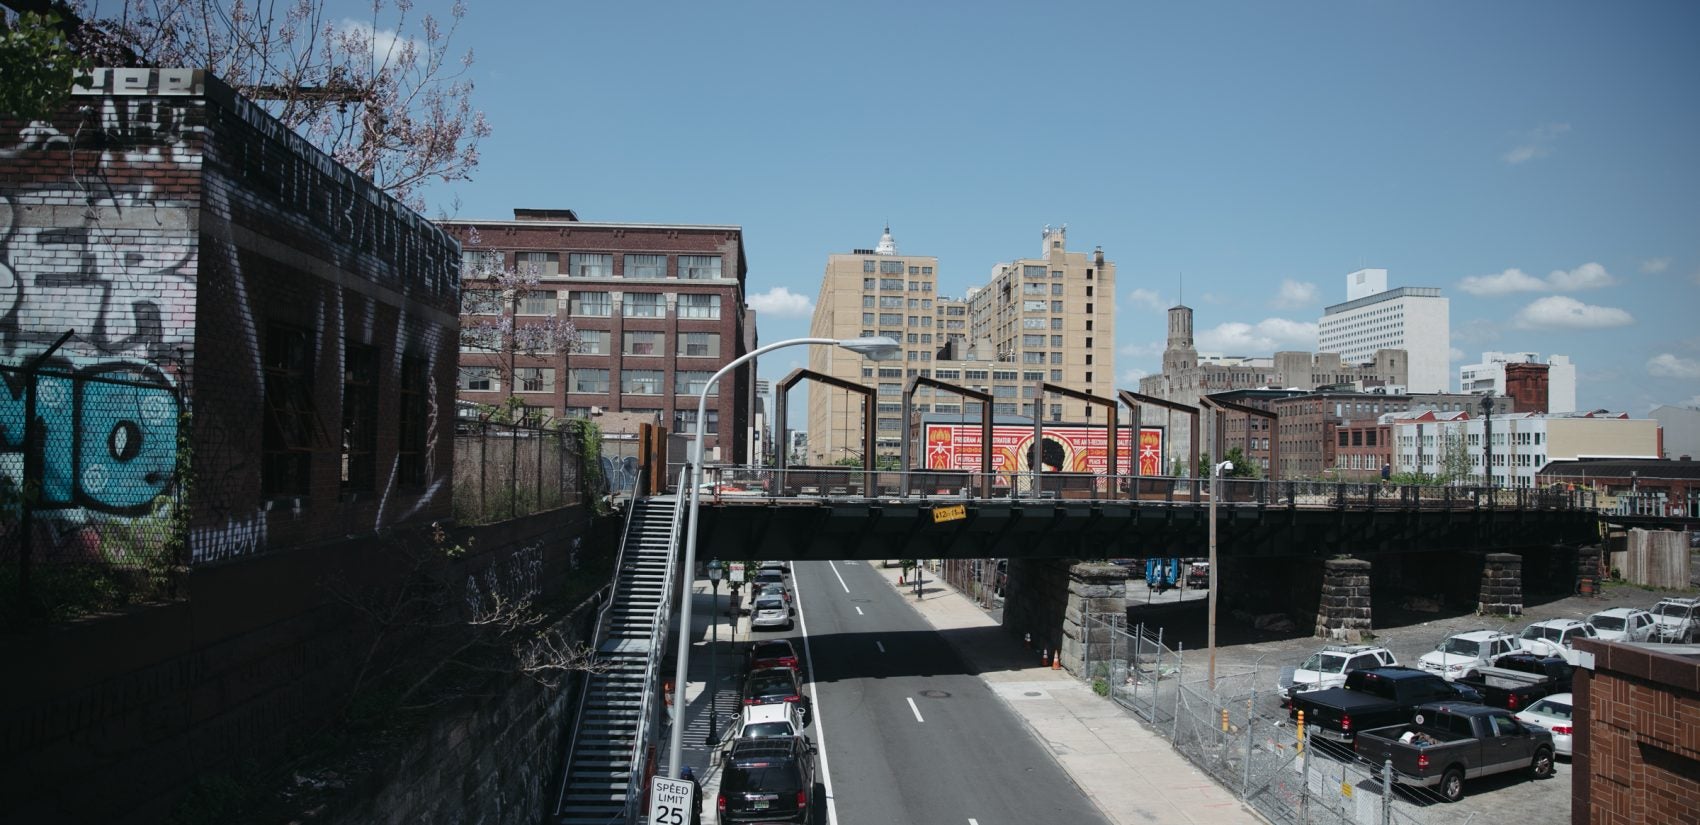 Phase One of the Rail Park from the main branch of the Reading Viaduct, May 2018